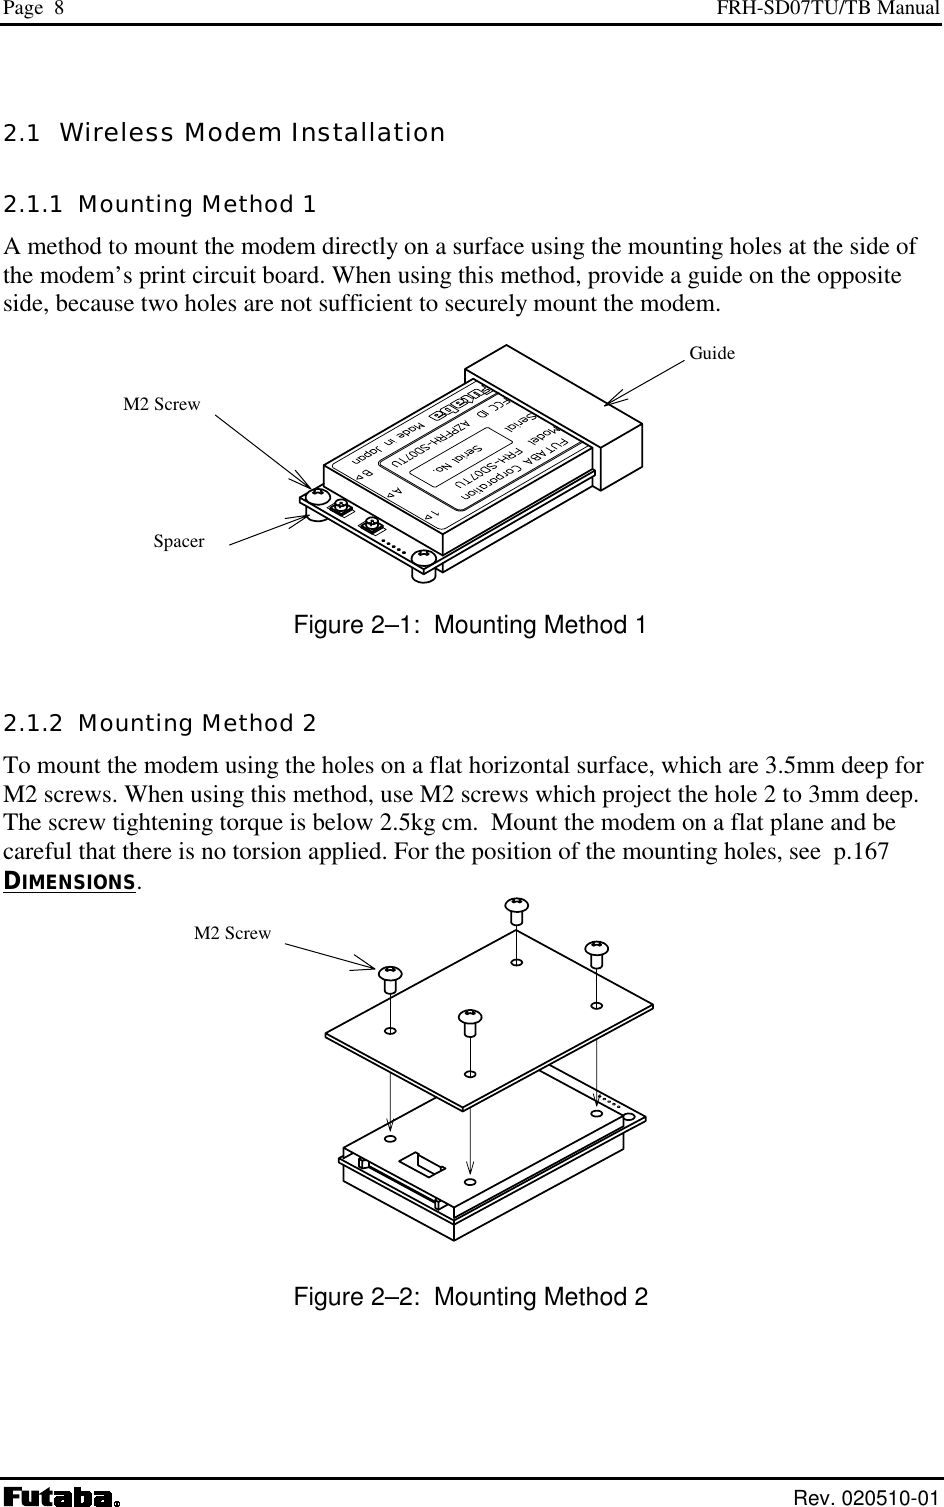 Page  8  FRH-SD07TU/TB Manual  Rev. 020510-01 2.1  Wireless Modem Installation 2.1.1  Mounting Method 1 A method to mount the modem directly on a surface using the mounting holes at the side of the modem’s print circuit board. When using this method, provide a guide on the opposite side, because two holes are not sufficient to securely mount the modem.   Figure 2–1:  Mounting Method 1 2.1.2  Mounting Method 2 To mount the modem using the holes on a flat horizontal surface, which are 3.5mm deep for M2 screws. When using this method, use M2 screws which project the hole 2 to 3mm deep. The screw tightening torque is below 2.5kg cm.  Mount the modem on a flat plane and be careful that there is no torsion applied. For the position of the mounting holes, see  p.167 DIMENSIONS.  Figure 2–2:  Mounting Method 2  Spacer M2 Screw  Guide M2 Screw  